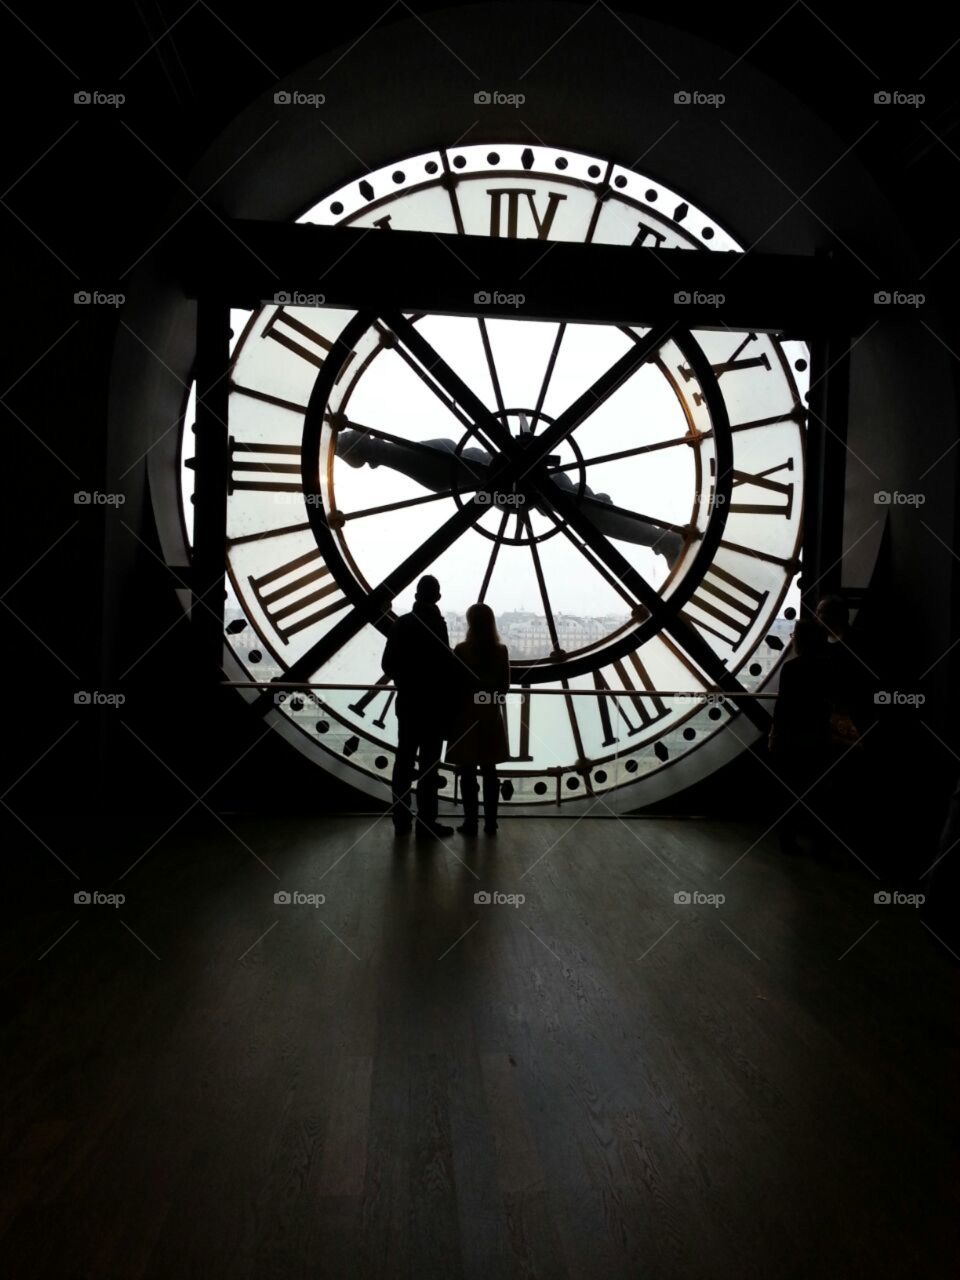 The clock at the Musee D'orsay in Paris